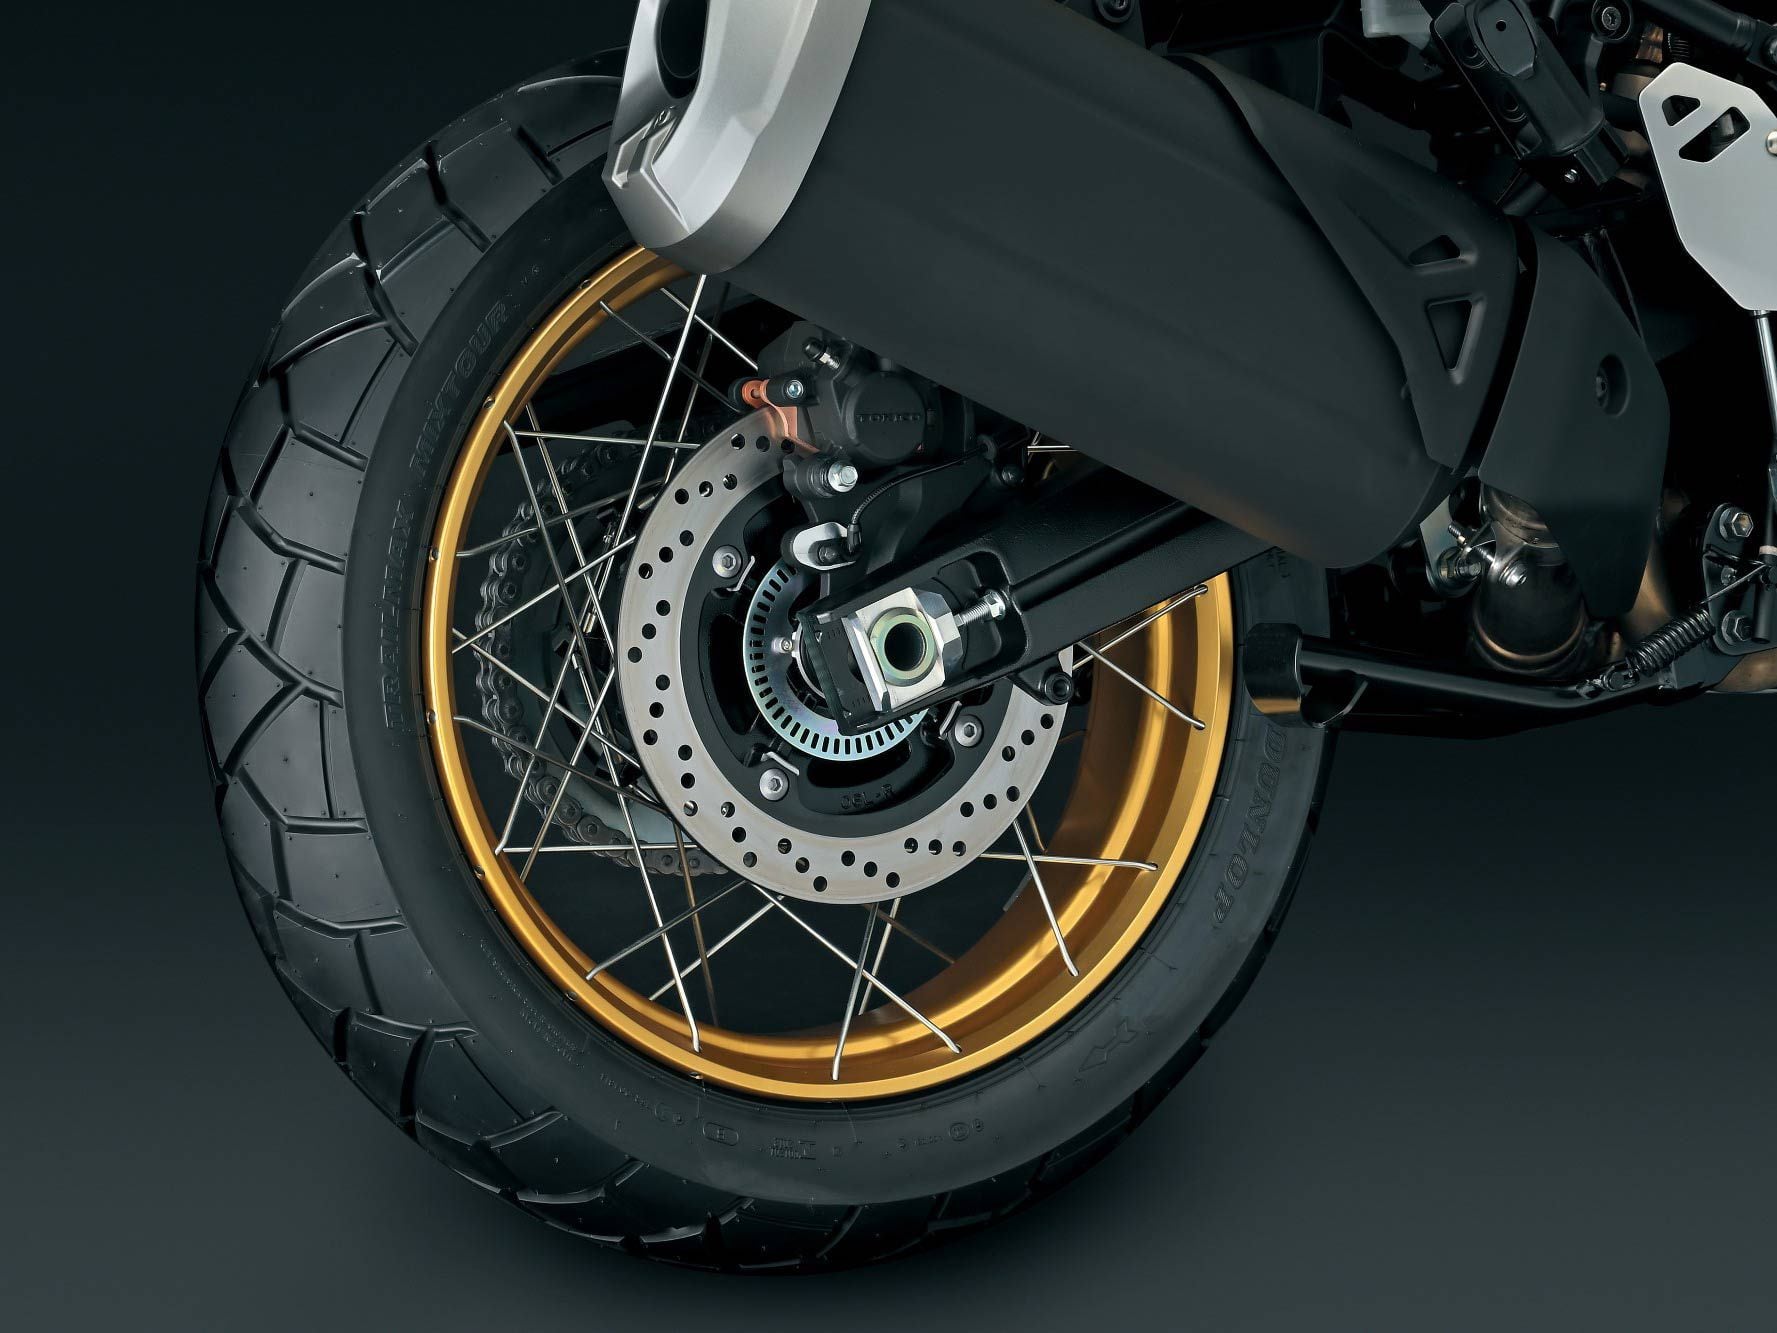 While the front end gets a new 21-inch wheel, the rear wheel remains a 17-inch unit with a cross-spoke, tubeless design.